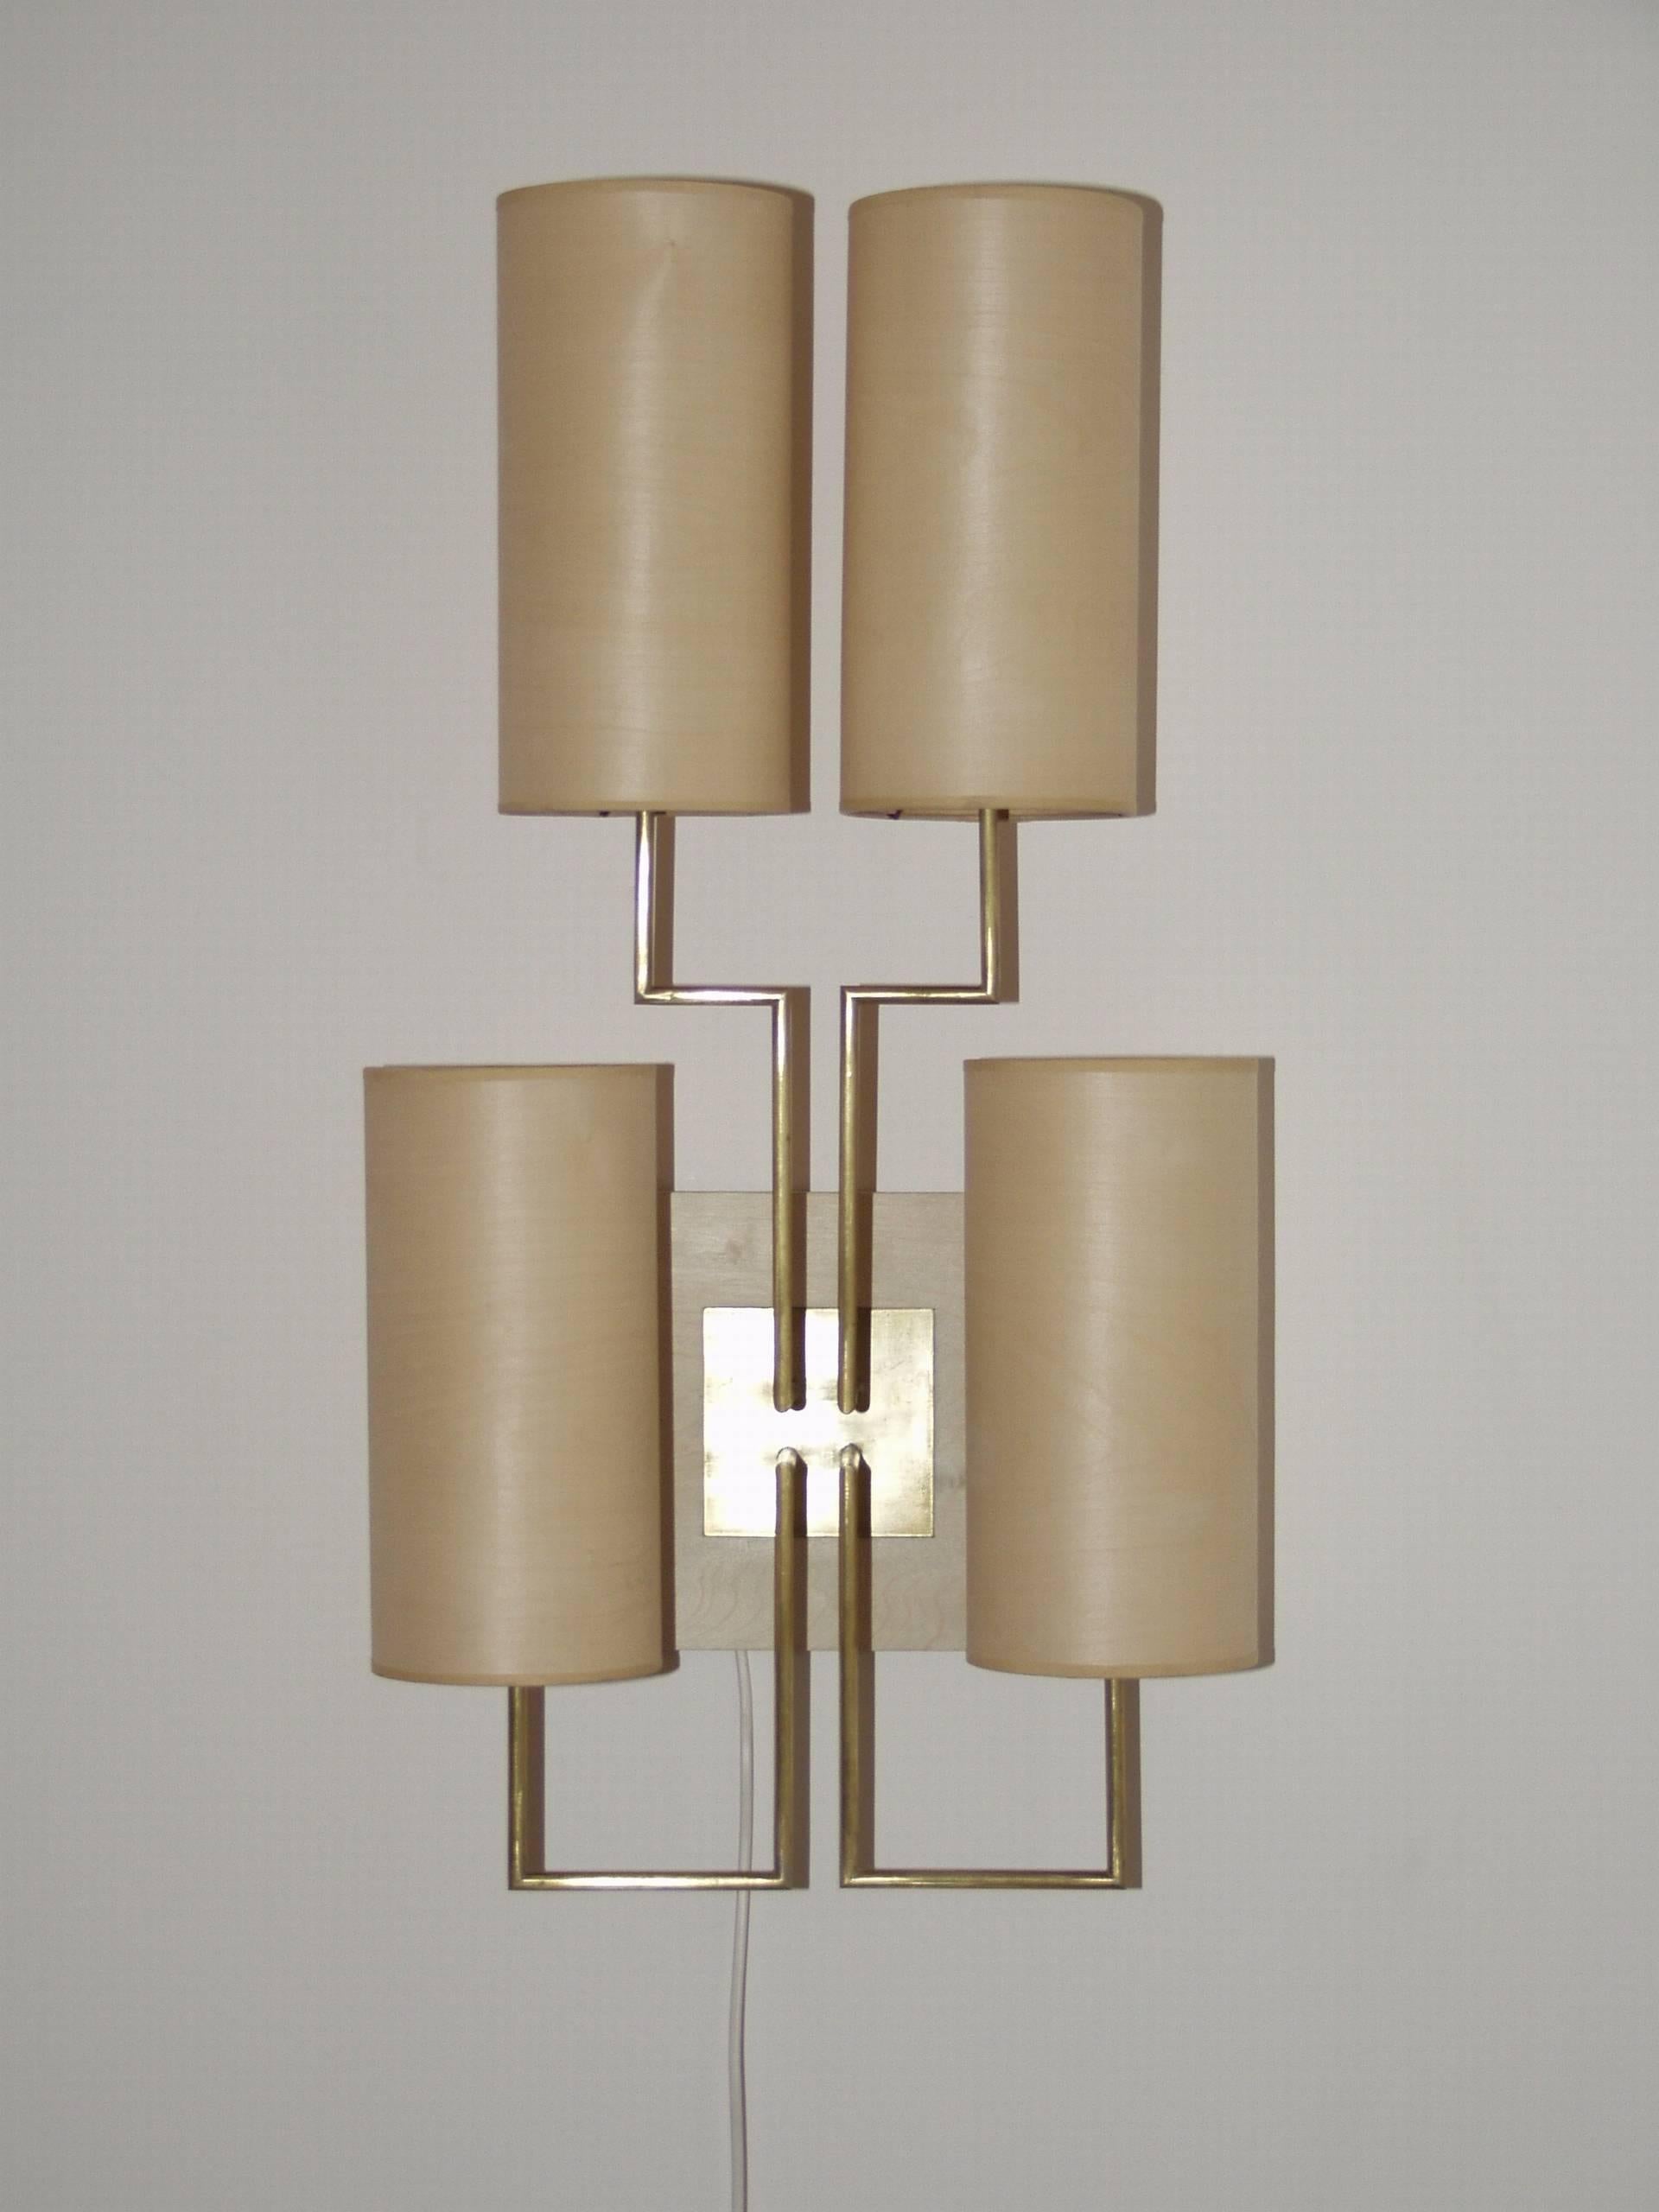 Wall Lamp Sconce “Tige4” Gold Bronze Patina and four Wooden lampshades by Aymeric Lefort made to order. 
This wall lamp is made in a metal gold patina tube fixed on a wooden Sycomore square. The lampshade is made in 